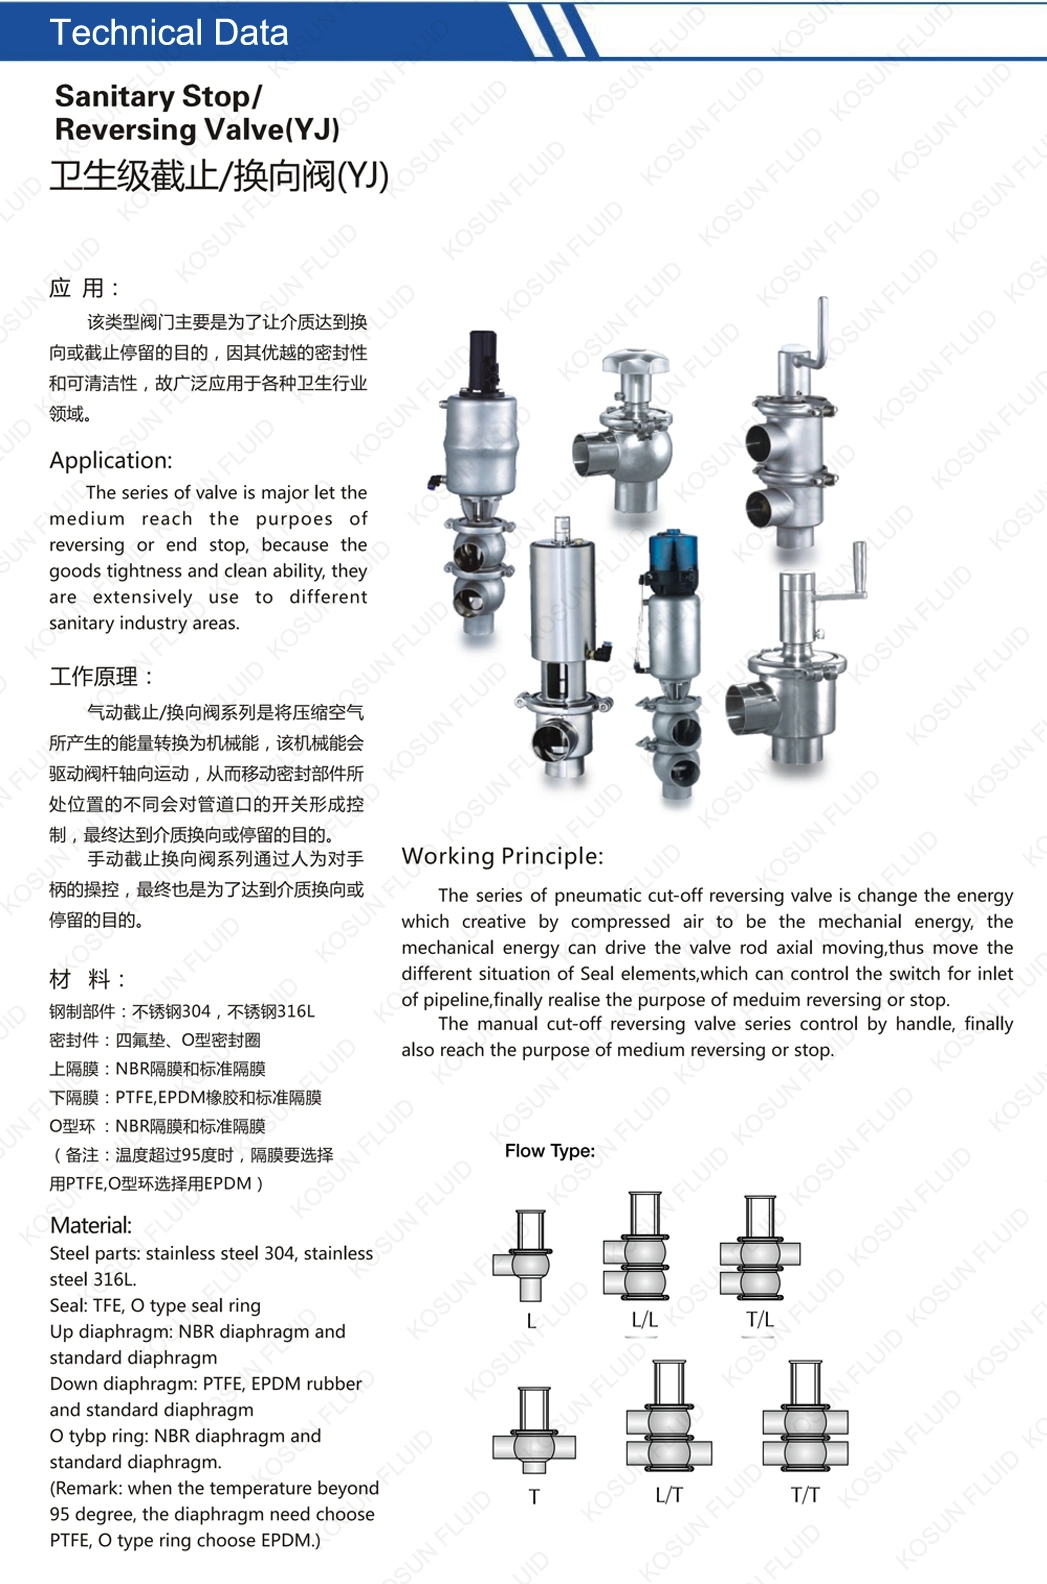 Stainless Steel Sanitary Mix Proof Valve